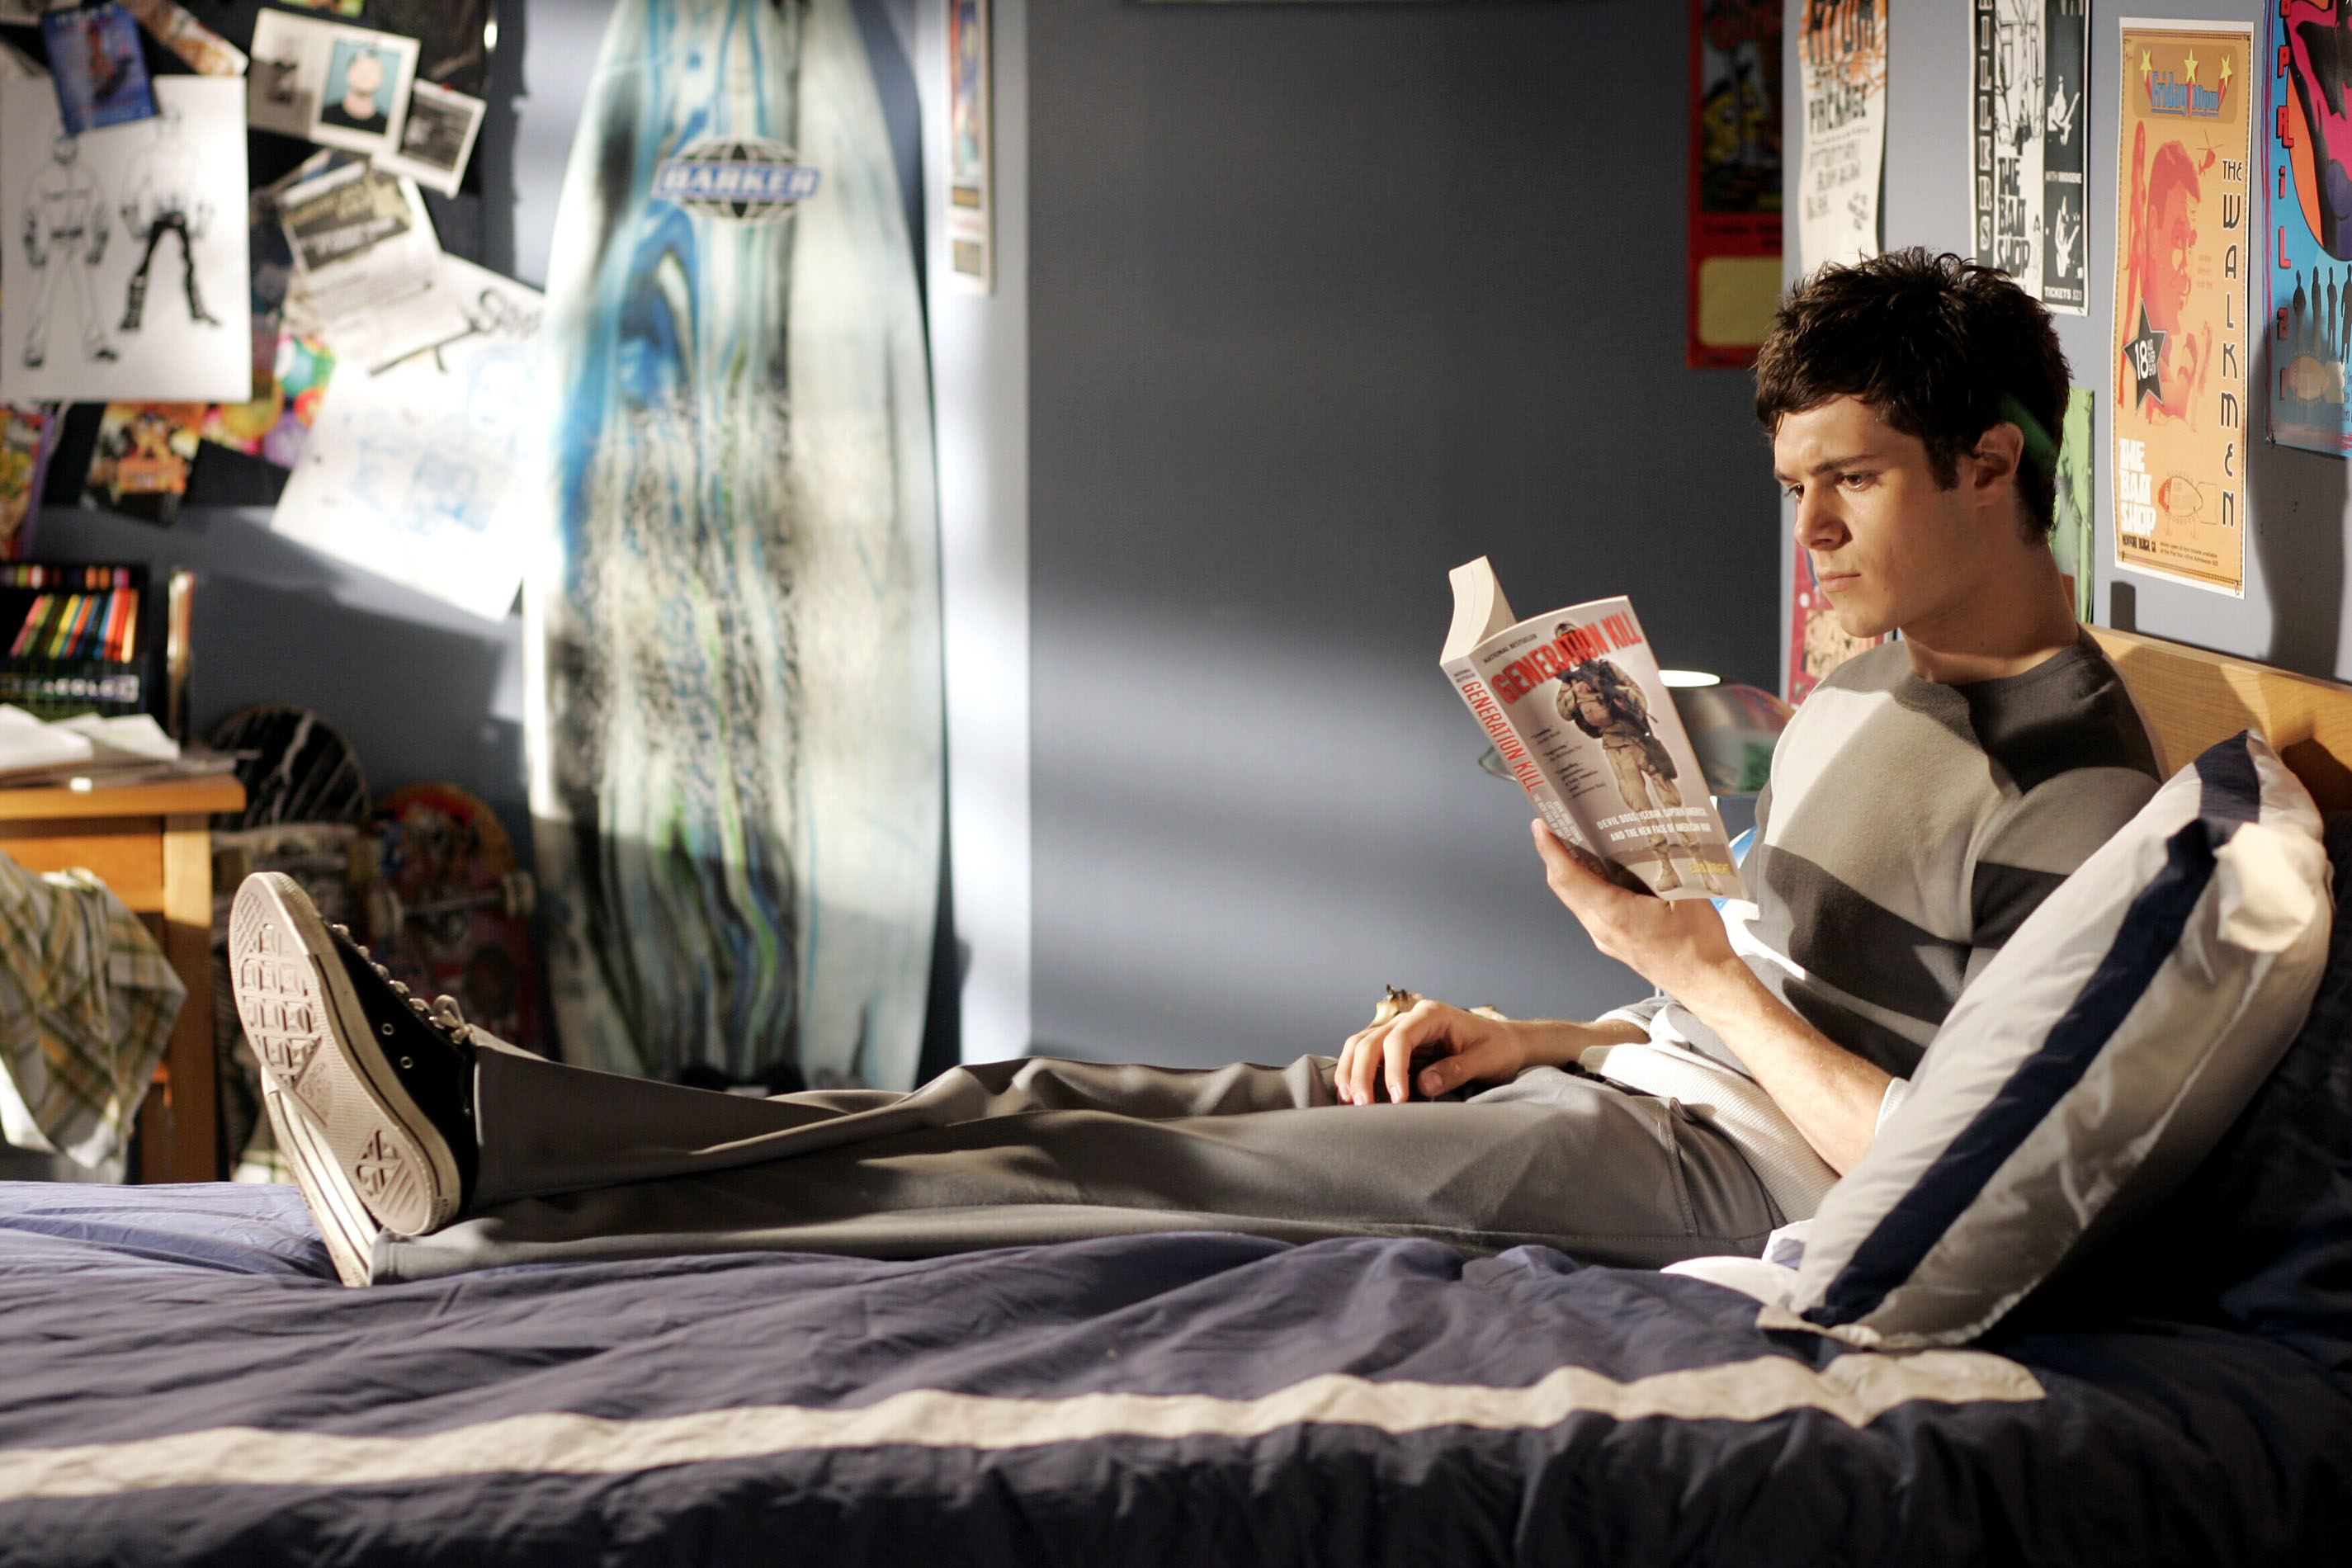 Teen boy reading a book in bed with his shoes on